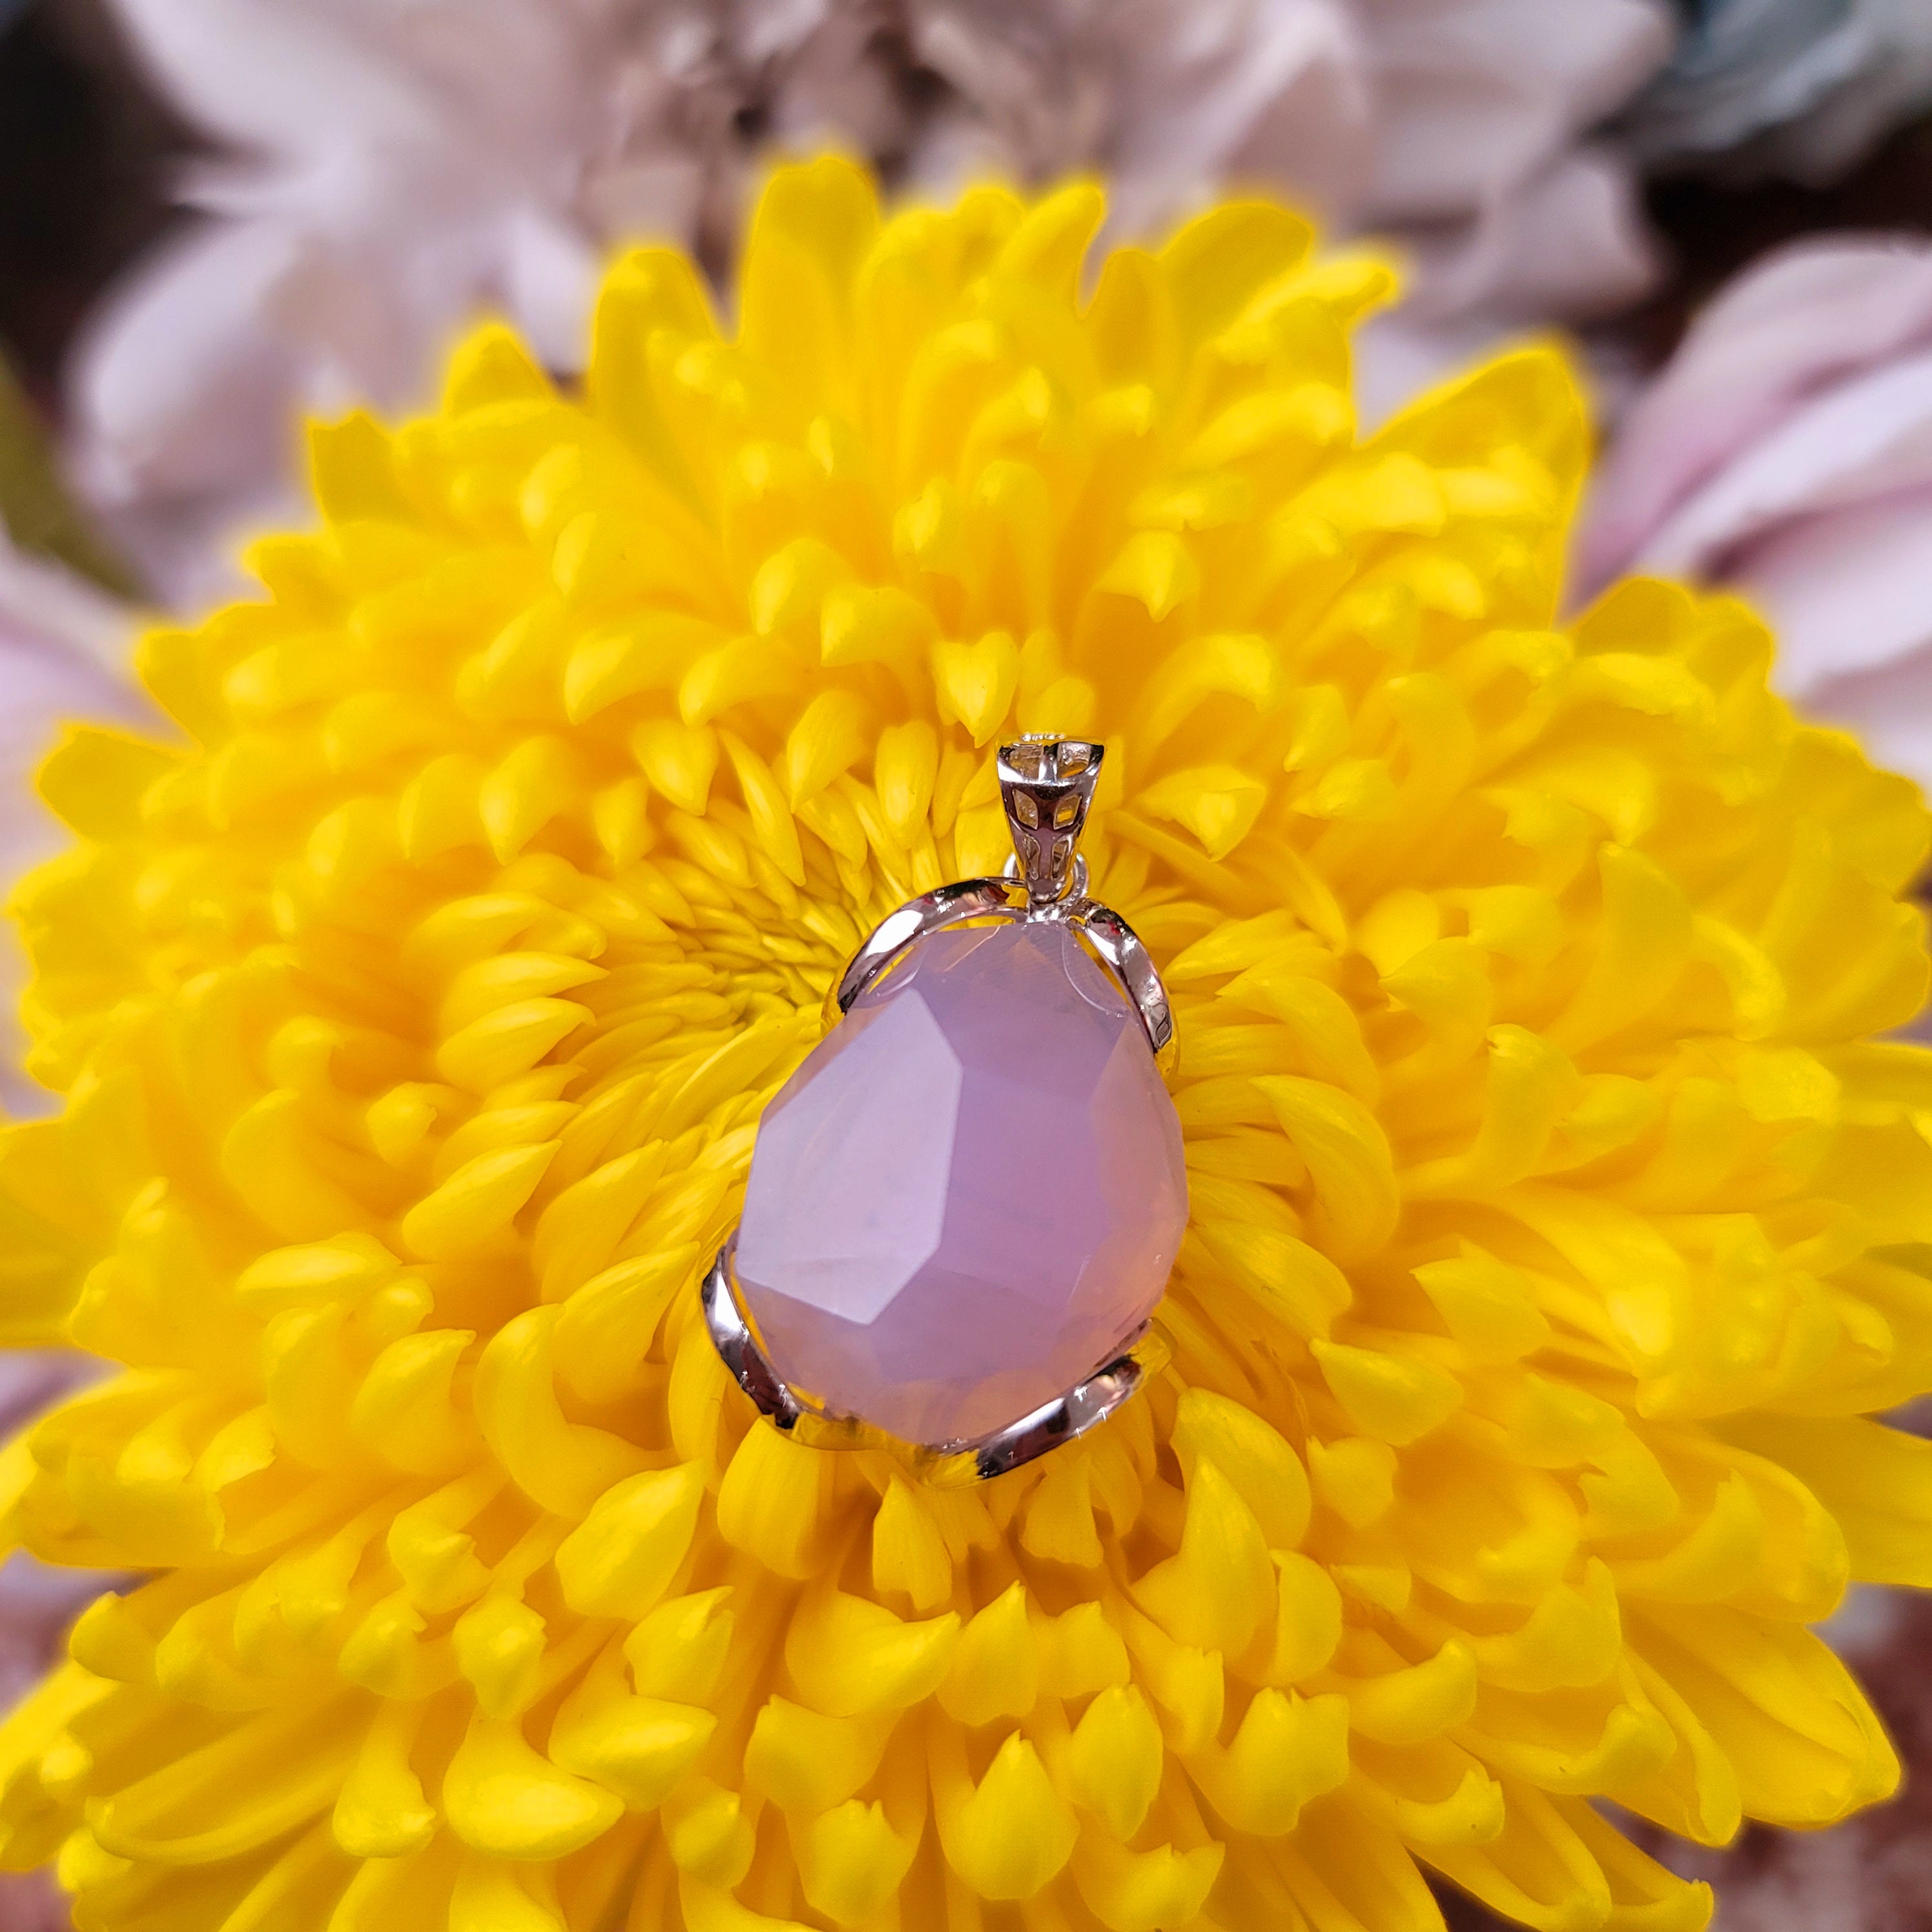 Amethyst "Lavender Moon Quartz" Goddess Pendant .925 Silver for Intuition and Guidance